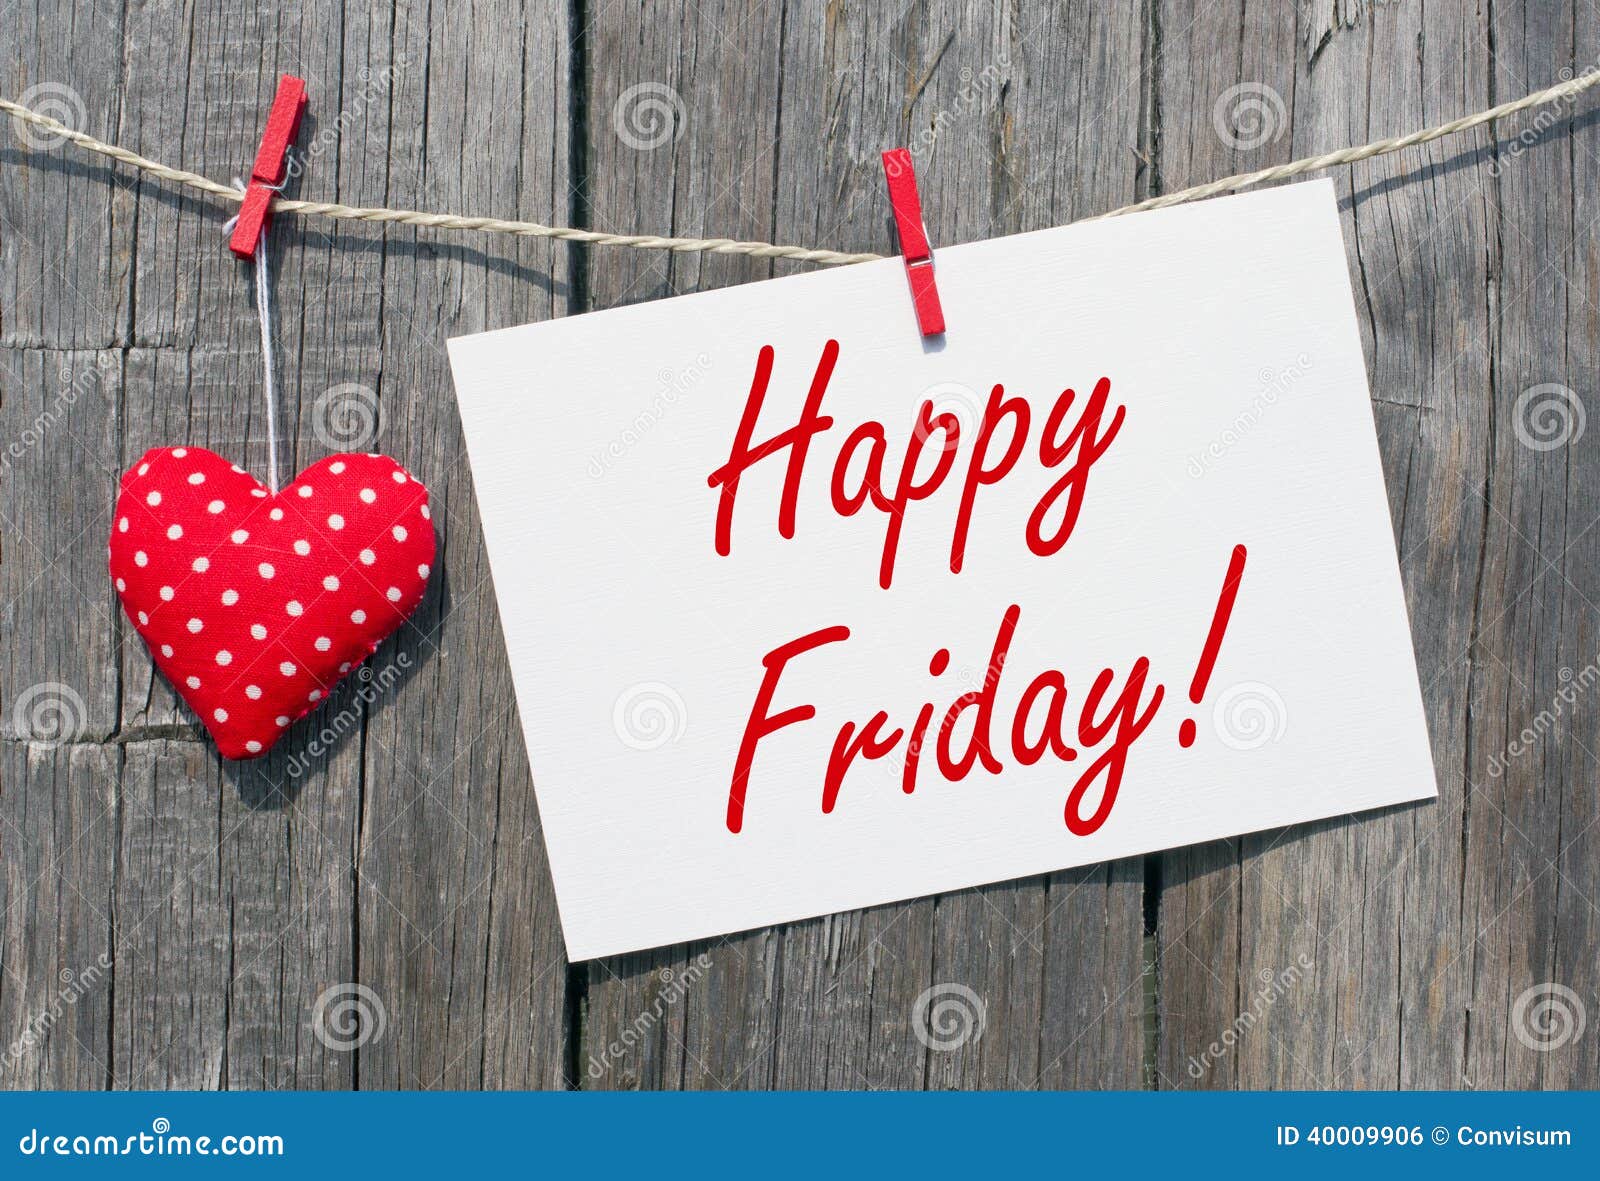 Happy Friday sign stock photo. Image of weekend, heart - 40009906